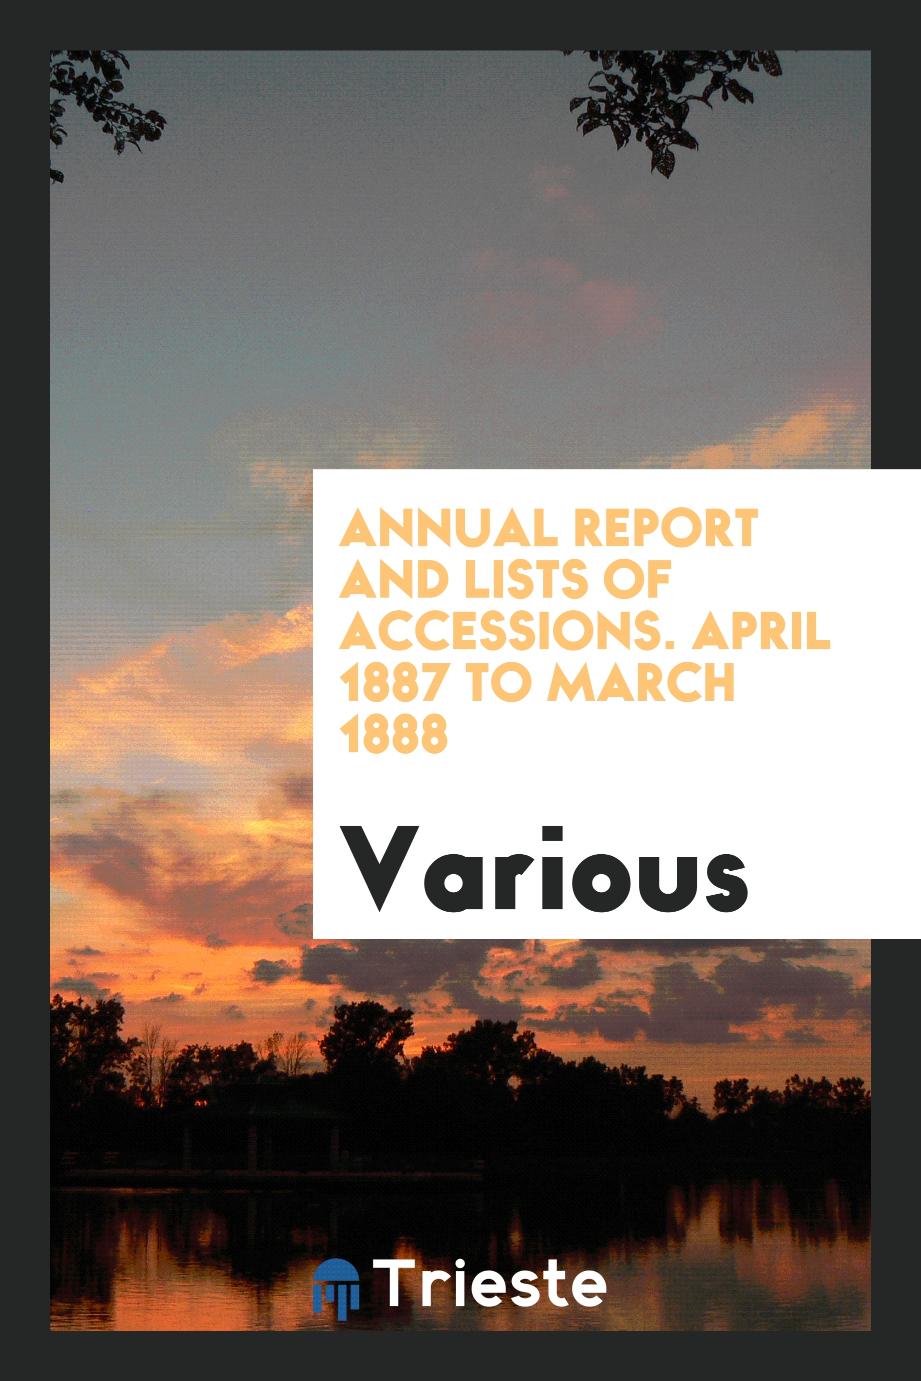 Annual Report and Lists of Accessions. April 1887 to March 1888